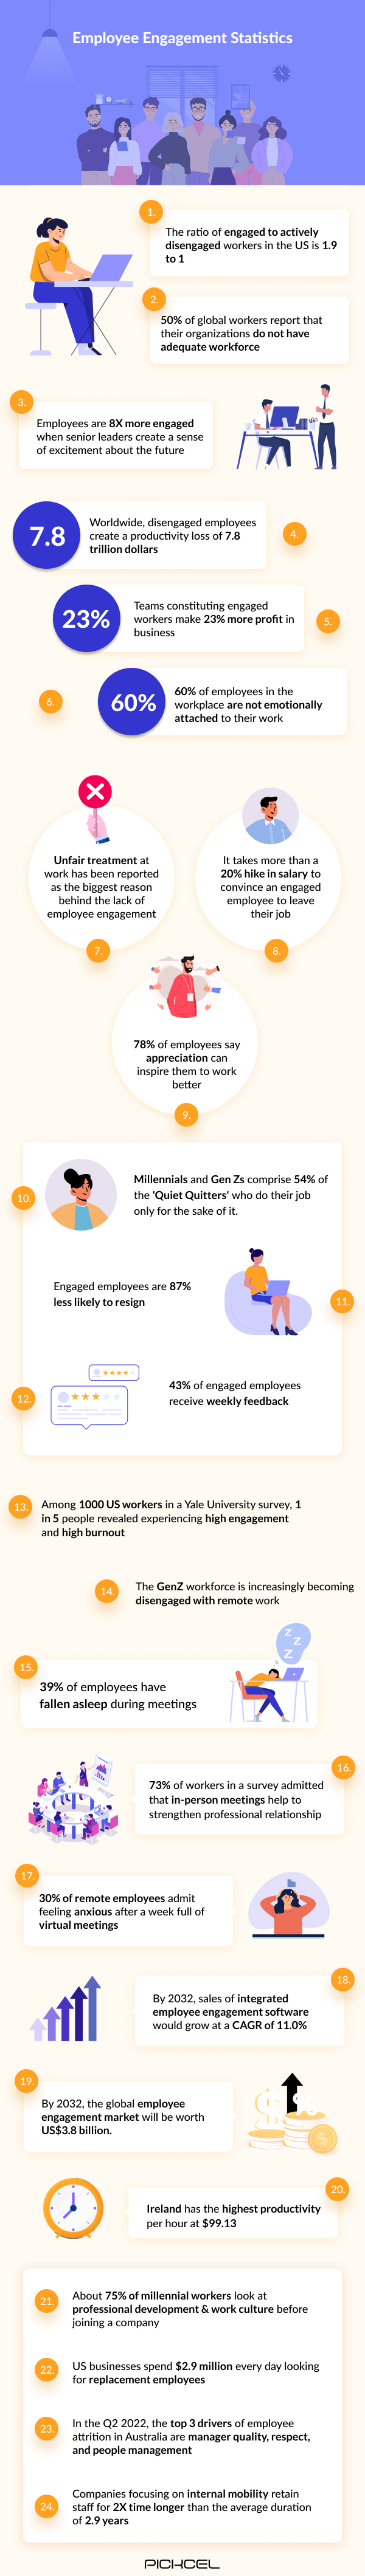 Infographic shows various employee engagement statistics and data with colorful illustrations